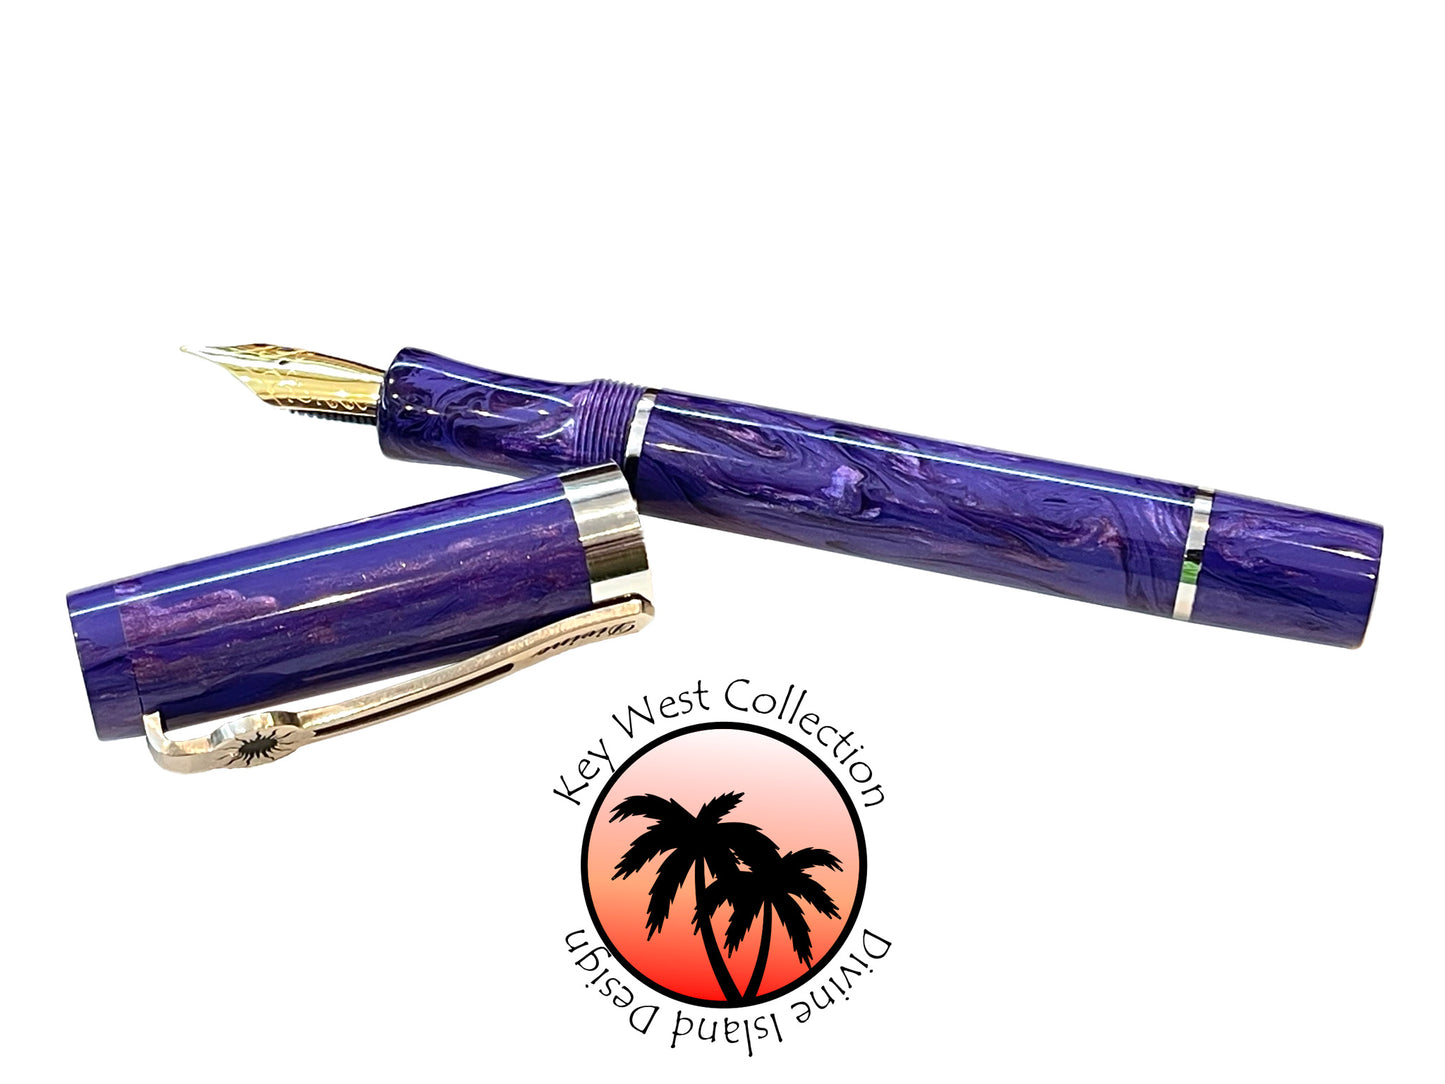 Key West Collection Fountain Pen - "Nightlife"